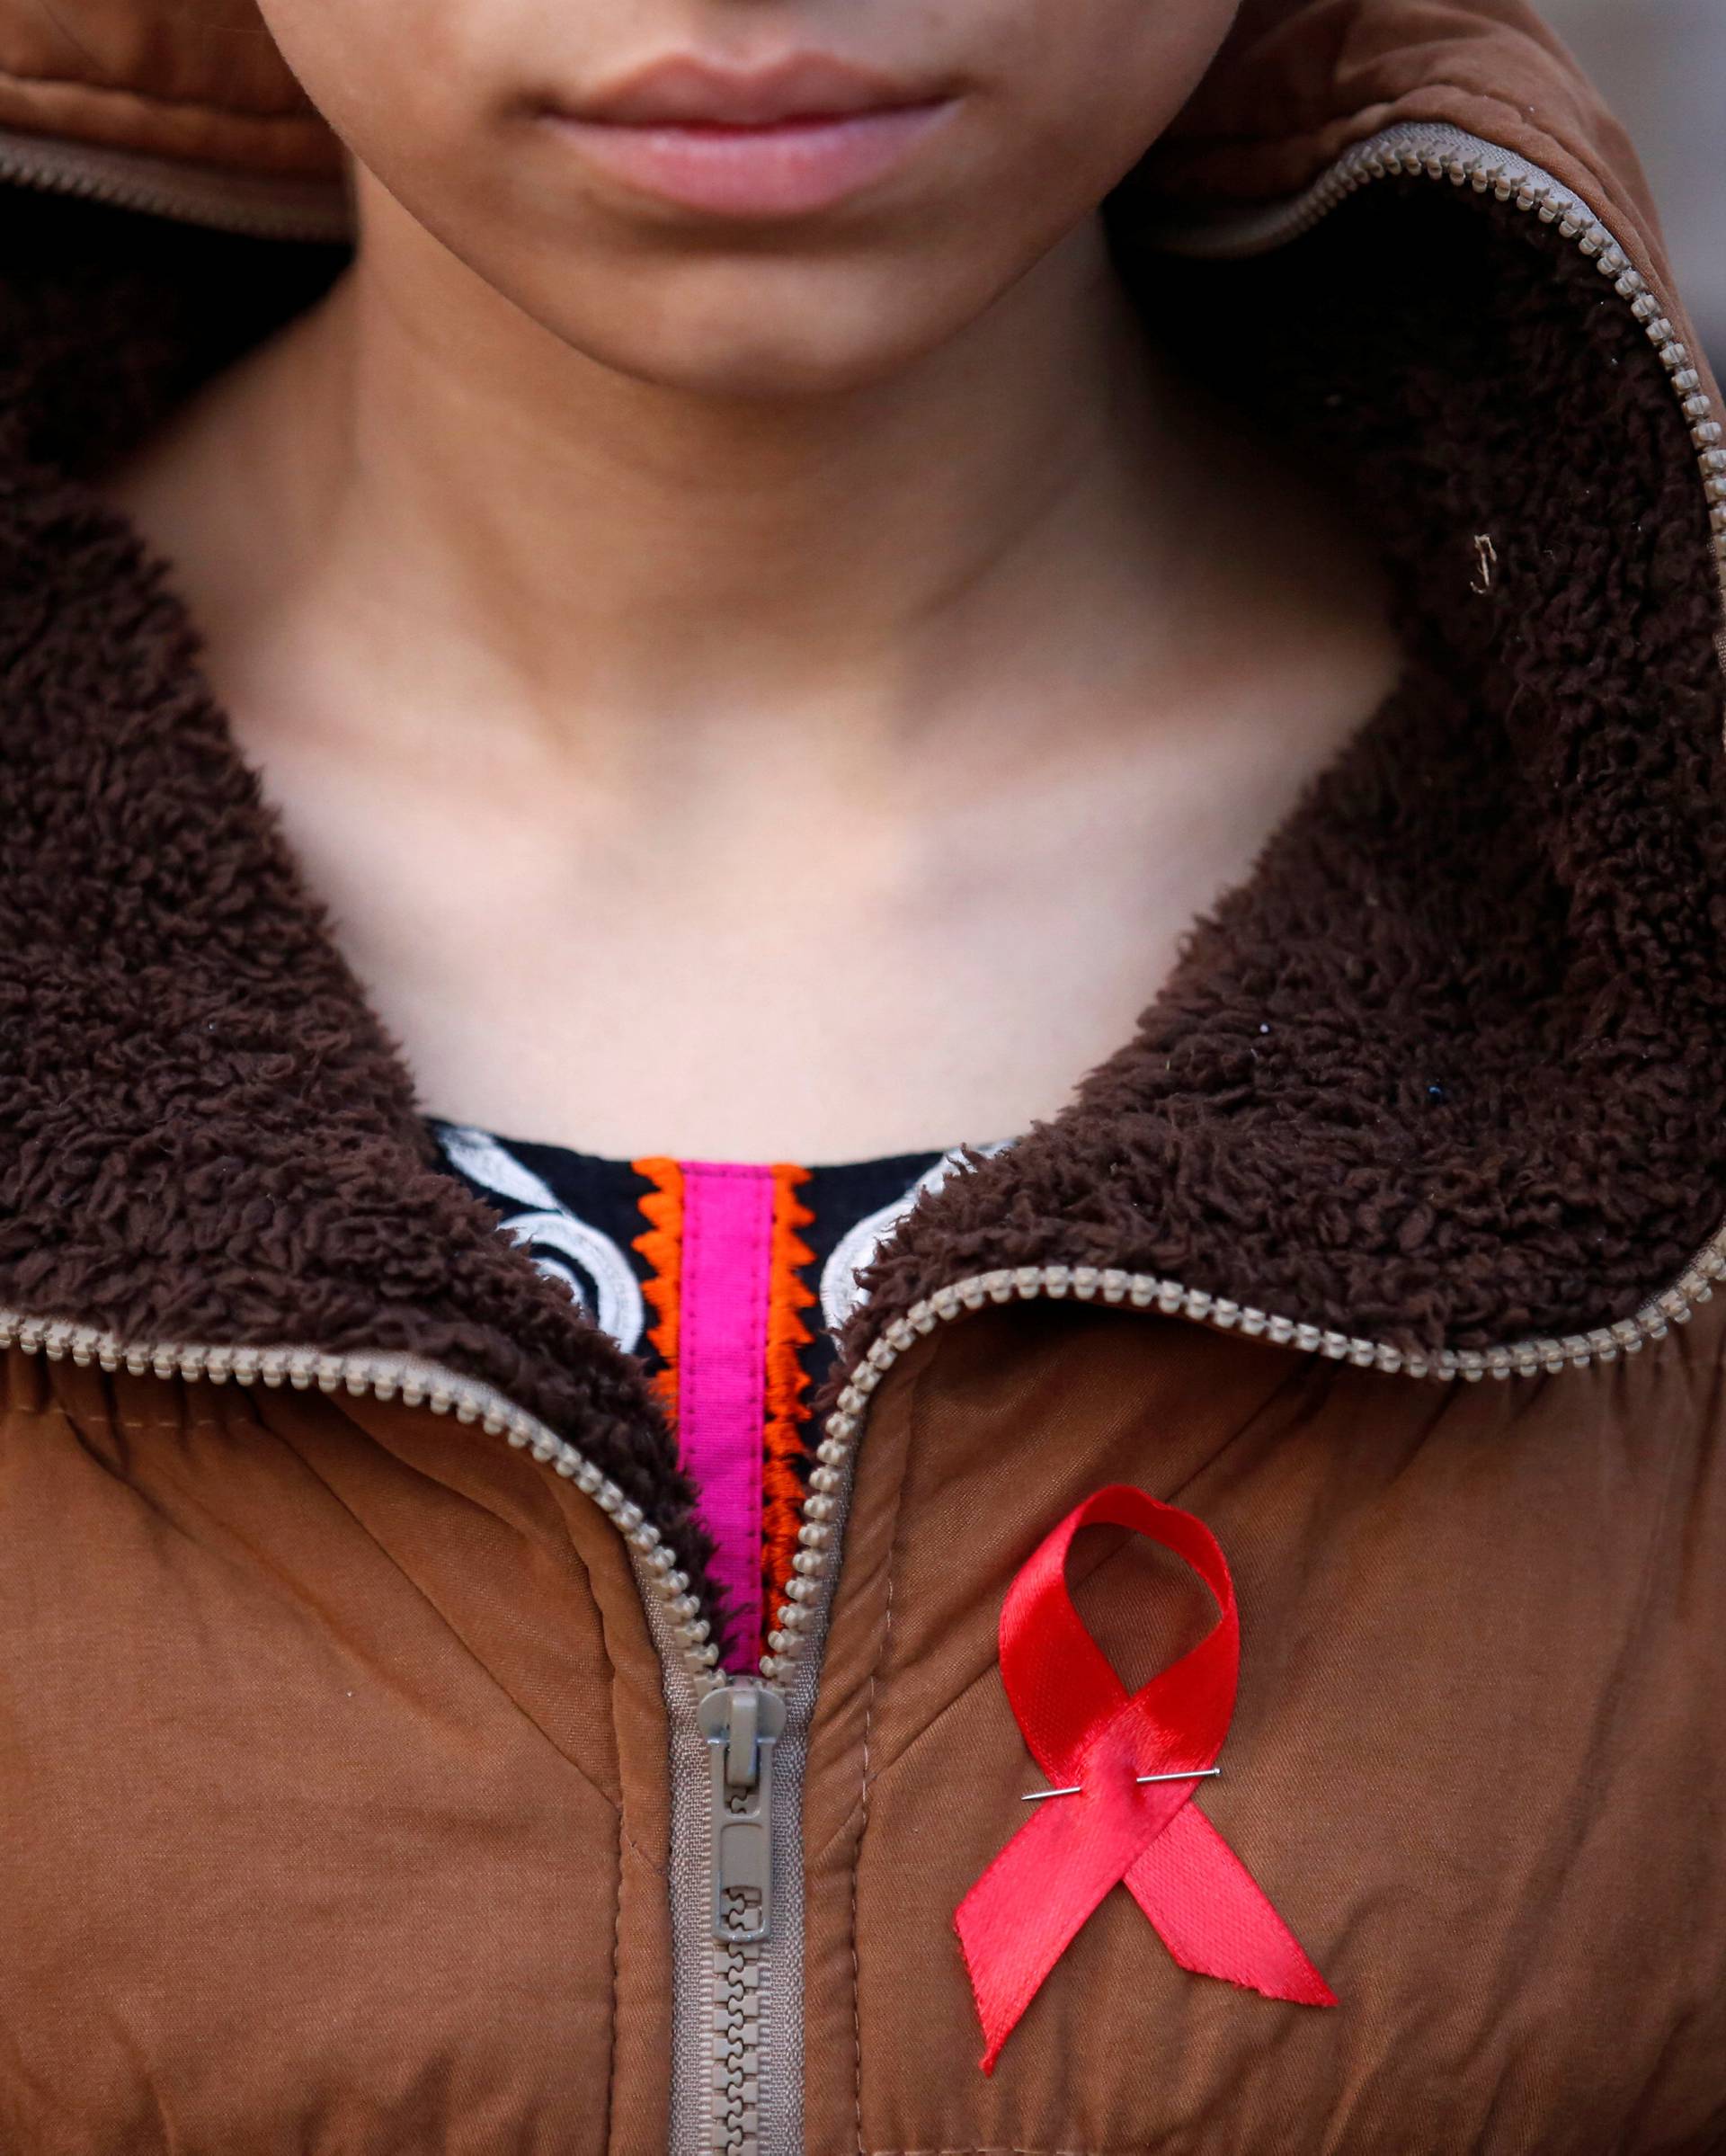 A participant with a red ribbon pin takes part in HIV/AIDS awareness campaign ahead of World Aids Day, in Kathmandu